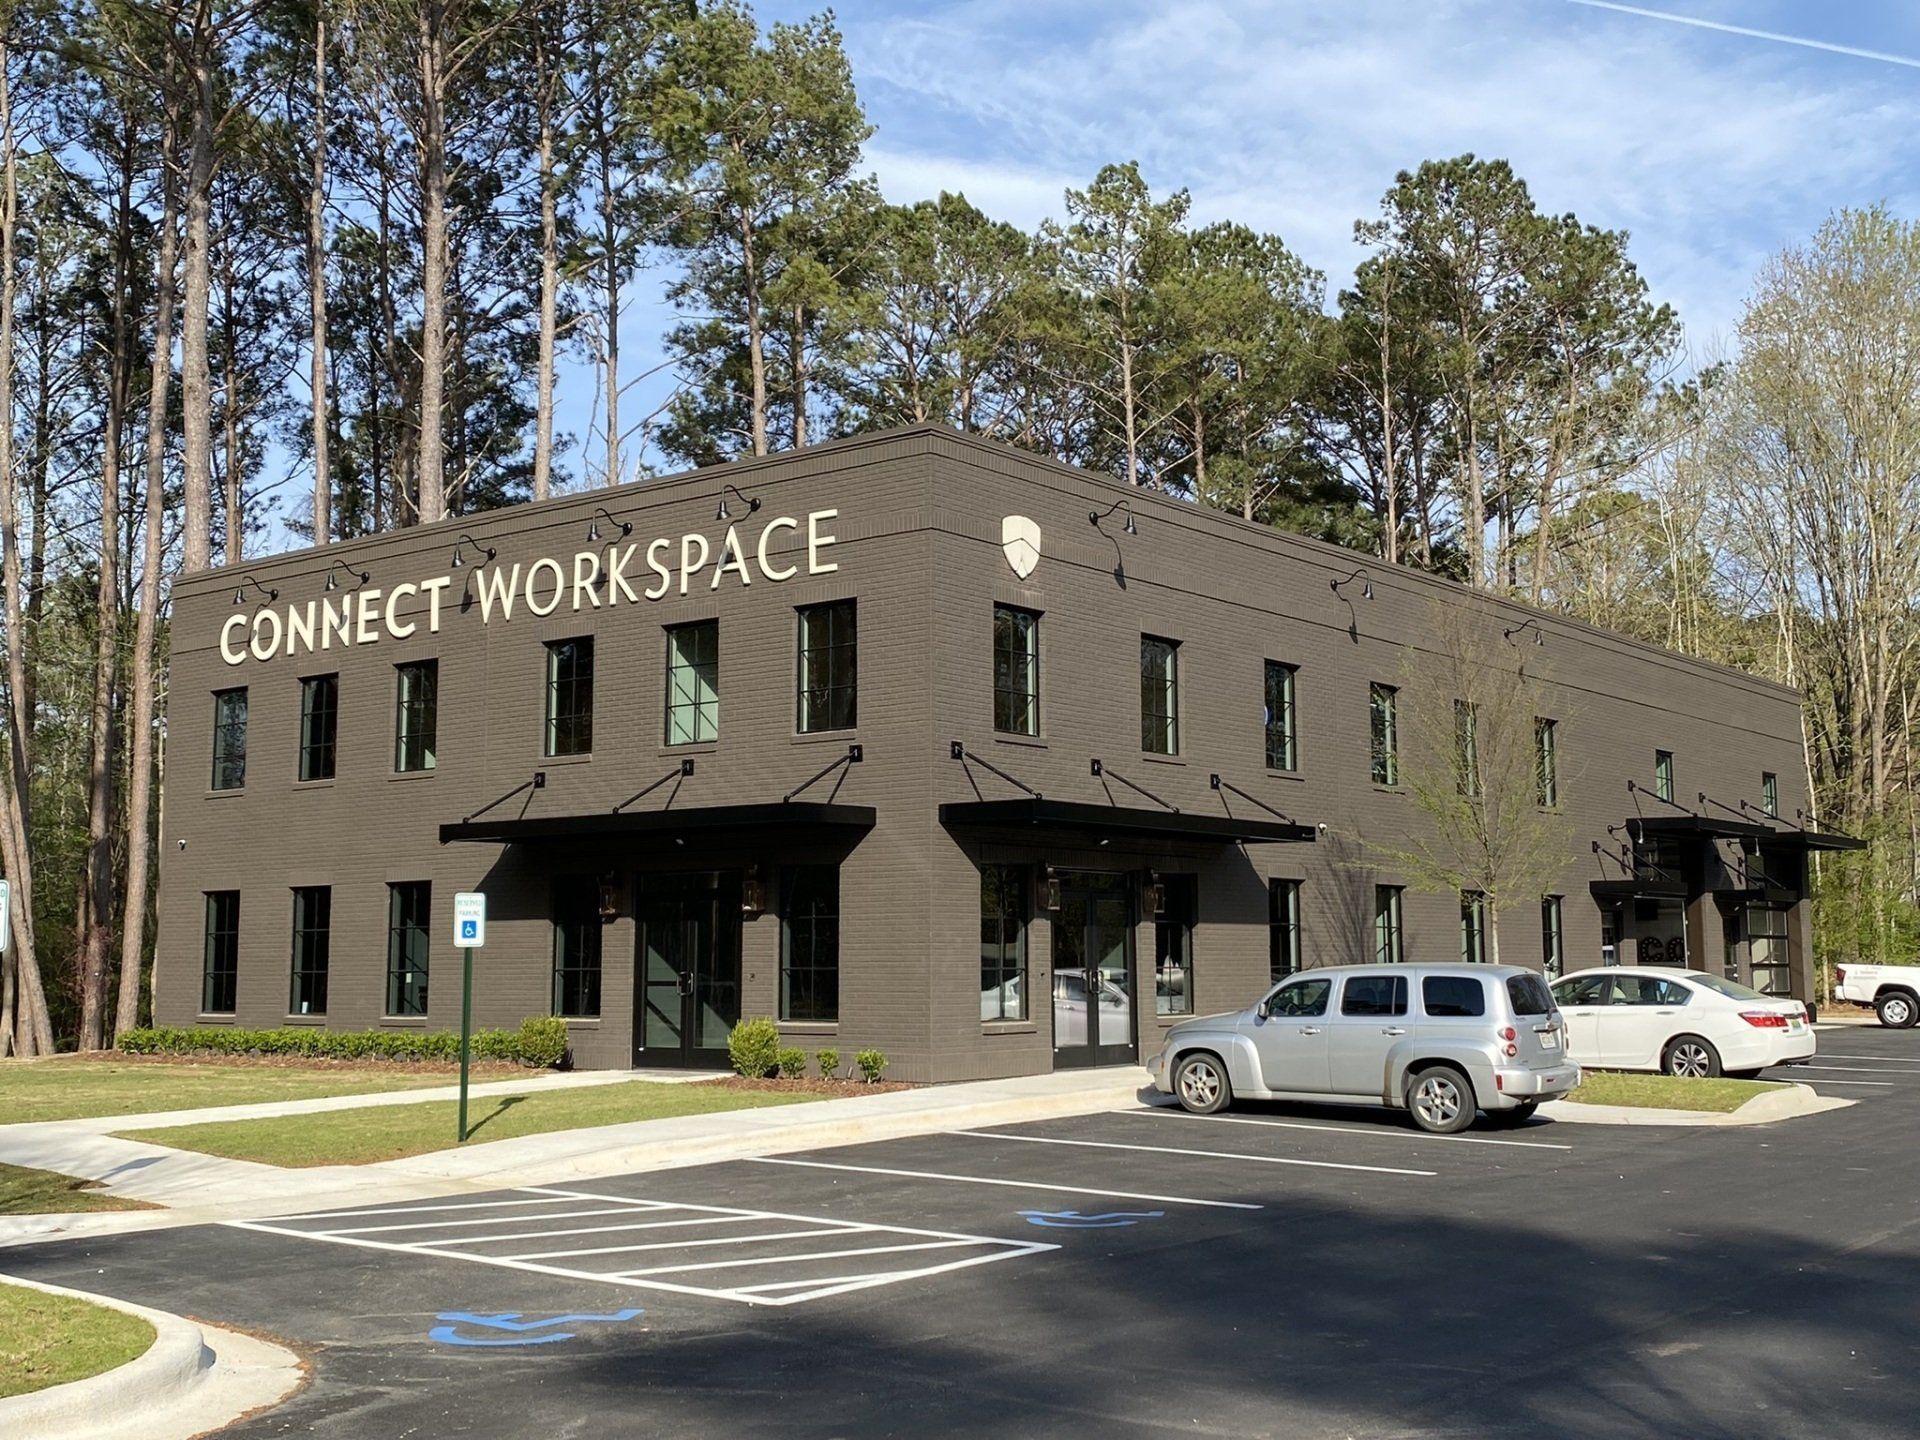 A large brick building with a sign that says connect workspace is surrounded by trees.